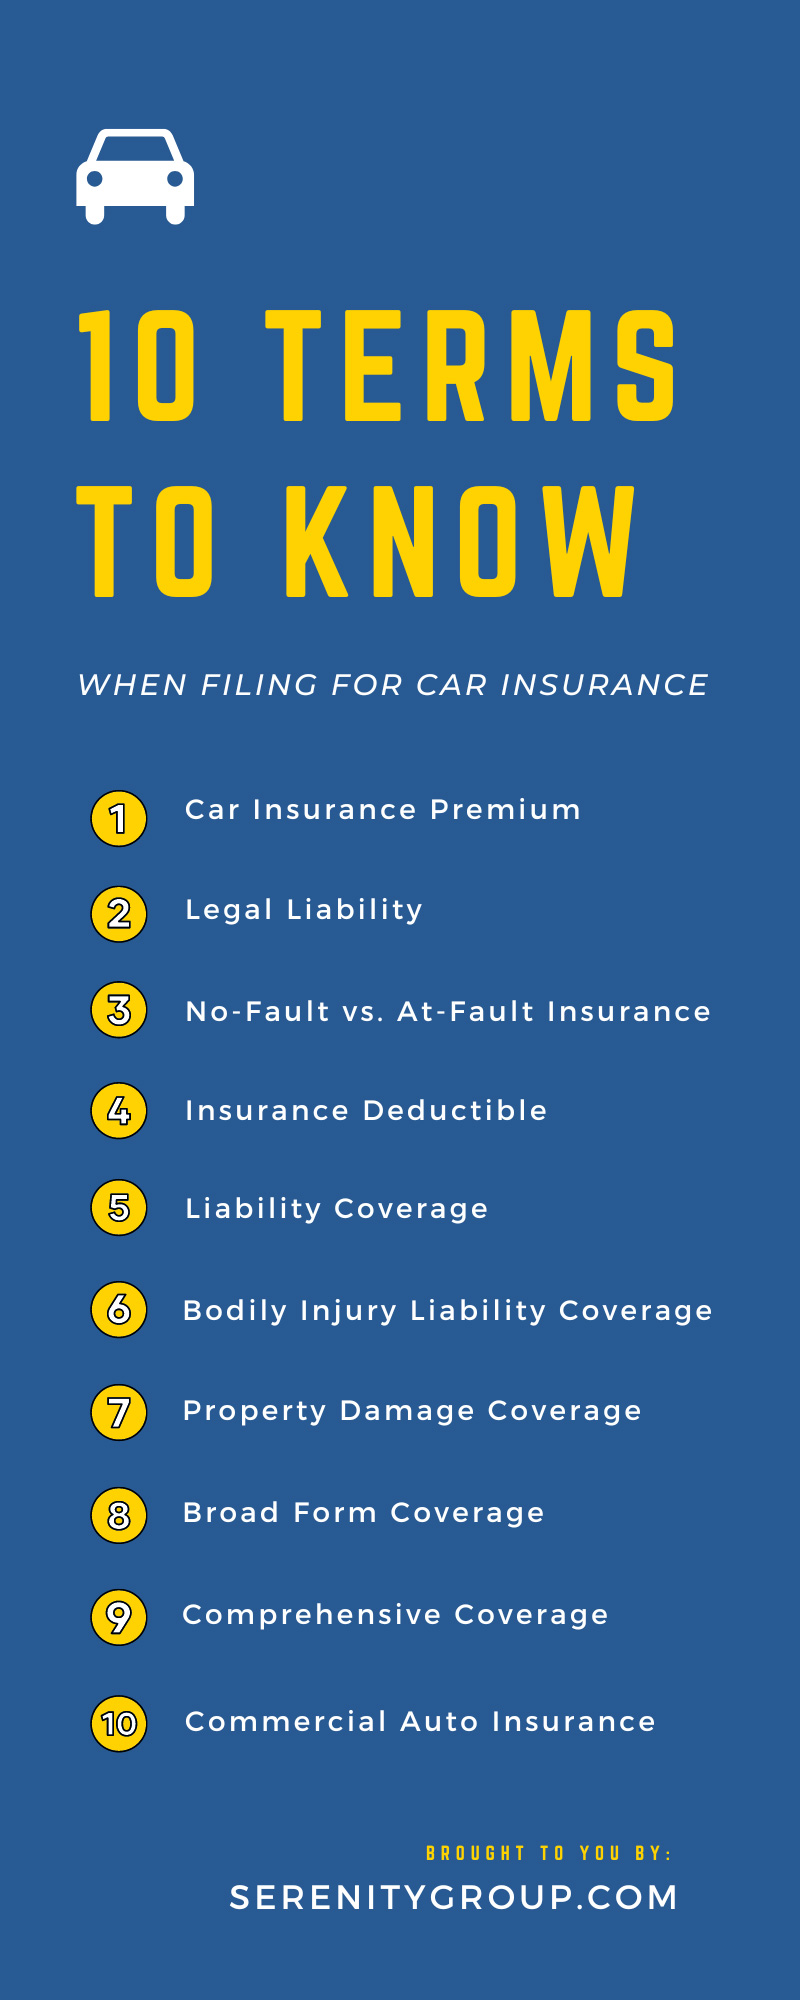 10 Terms To Know When Filing for Car Insurance